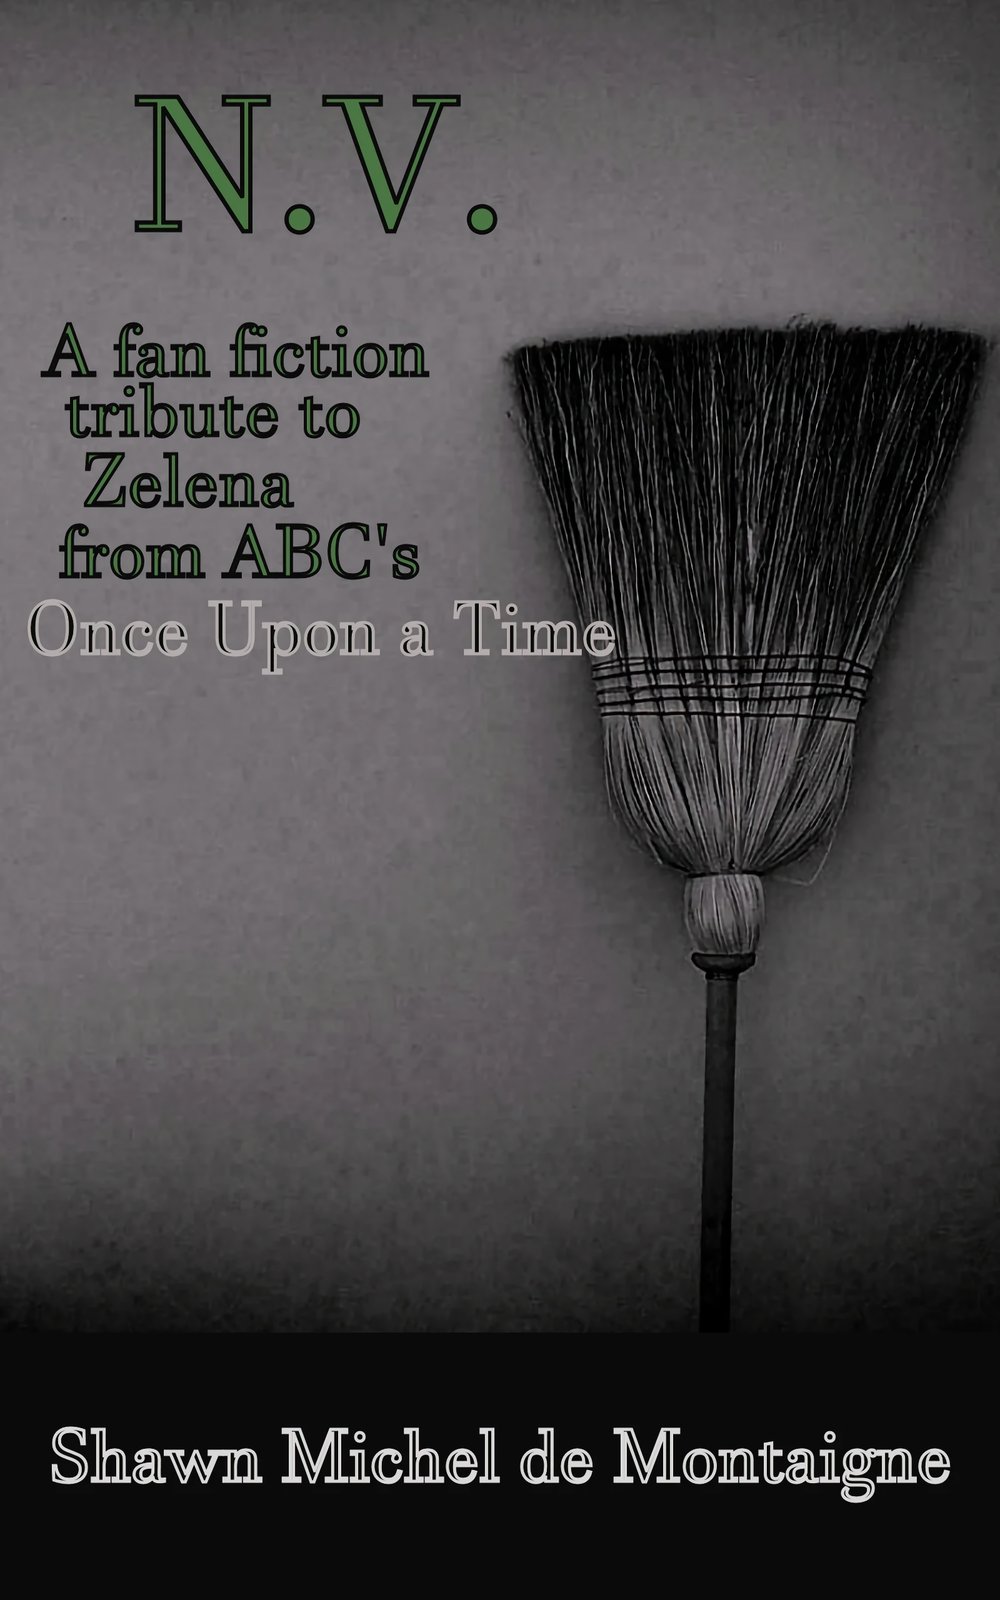 N.V.: A fan fiction tribute to Zelena from ABC's Once Upon a Time